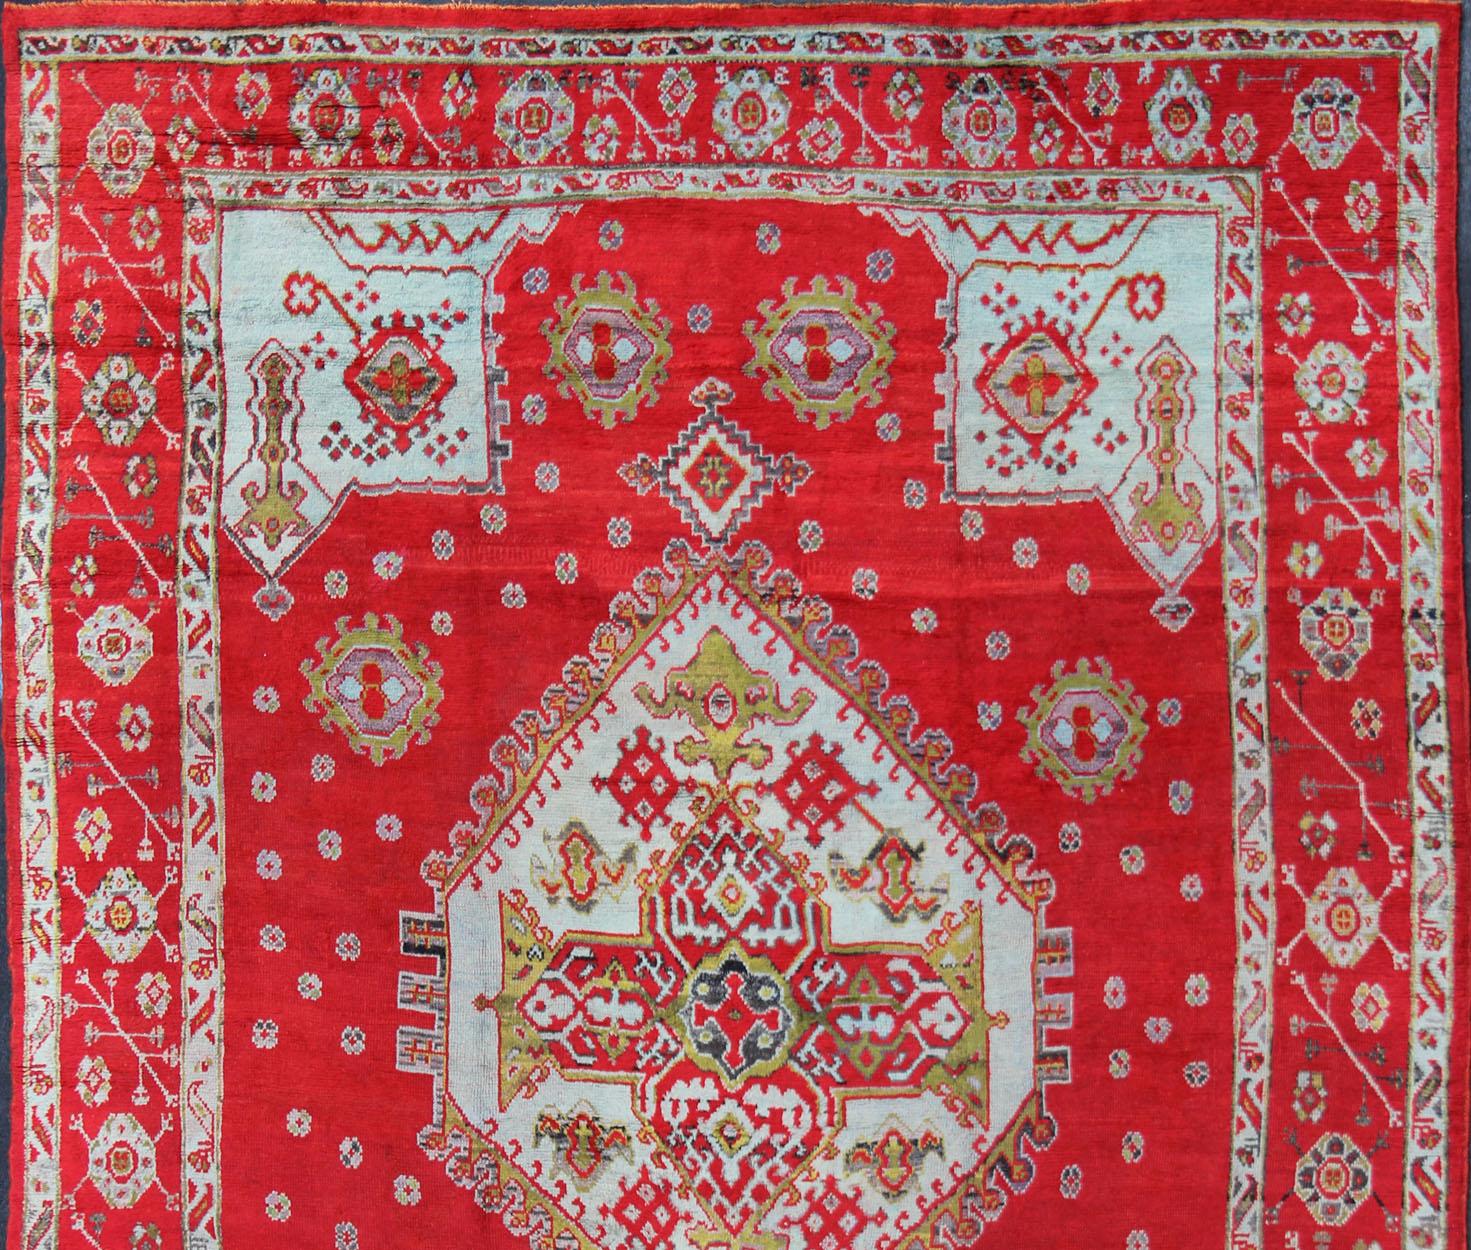 Large Antique Oushak Rug in Red, Acid Green and Ice Blue by Keivan Woven Arts
Antique Oushak rug with beautiful red, Keivan Woven Arts/ Rug/BHR-2

Measure: 12' x 16'5

This lovely antique Oushak has a bold geometric medallion with four elegant